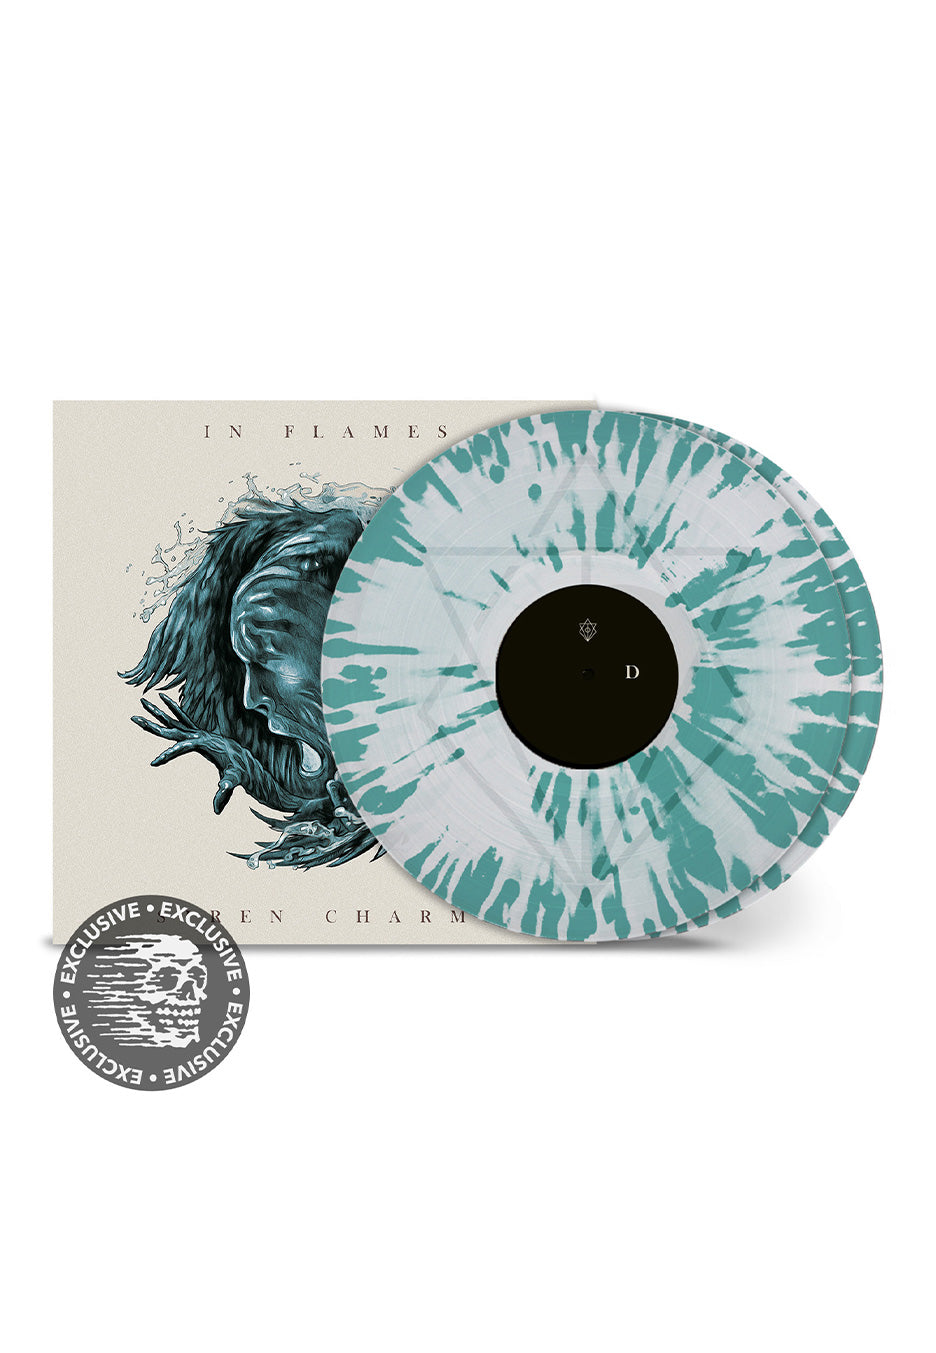 In Flames - Siren Charms (10th Anniversary) Ltd. Crystal Clear/Turquoi